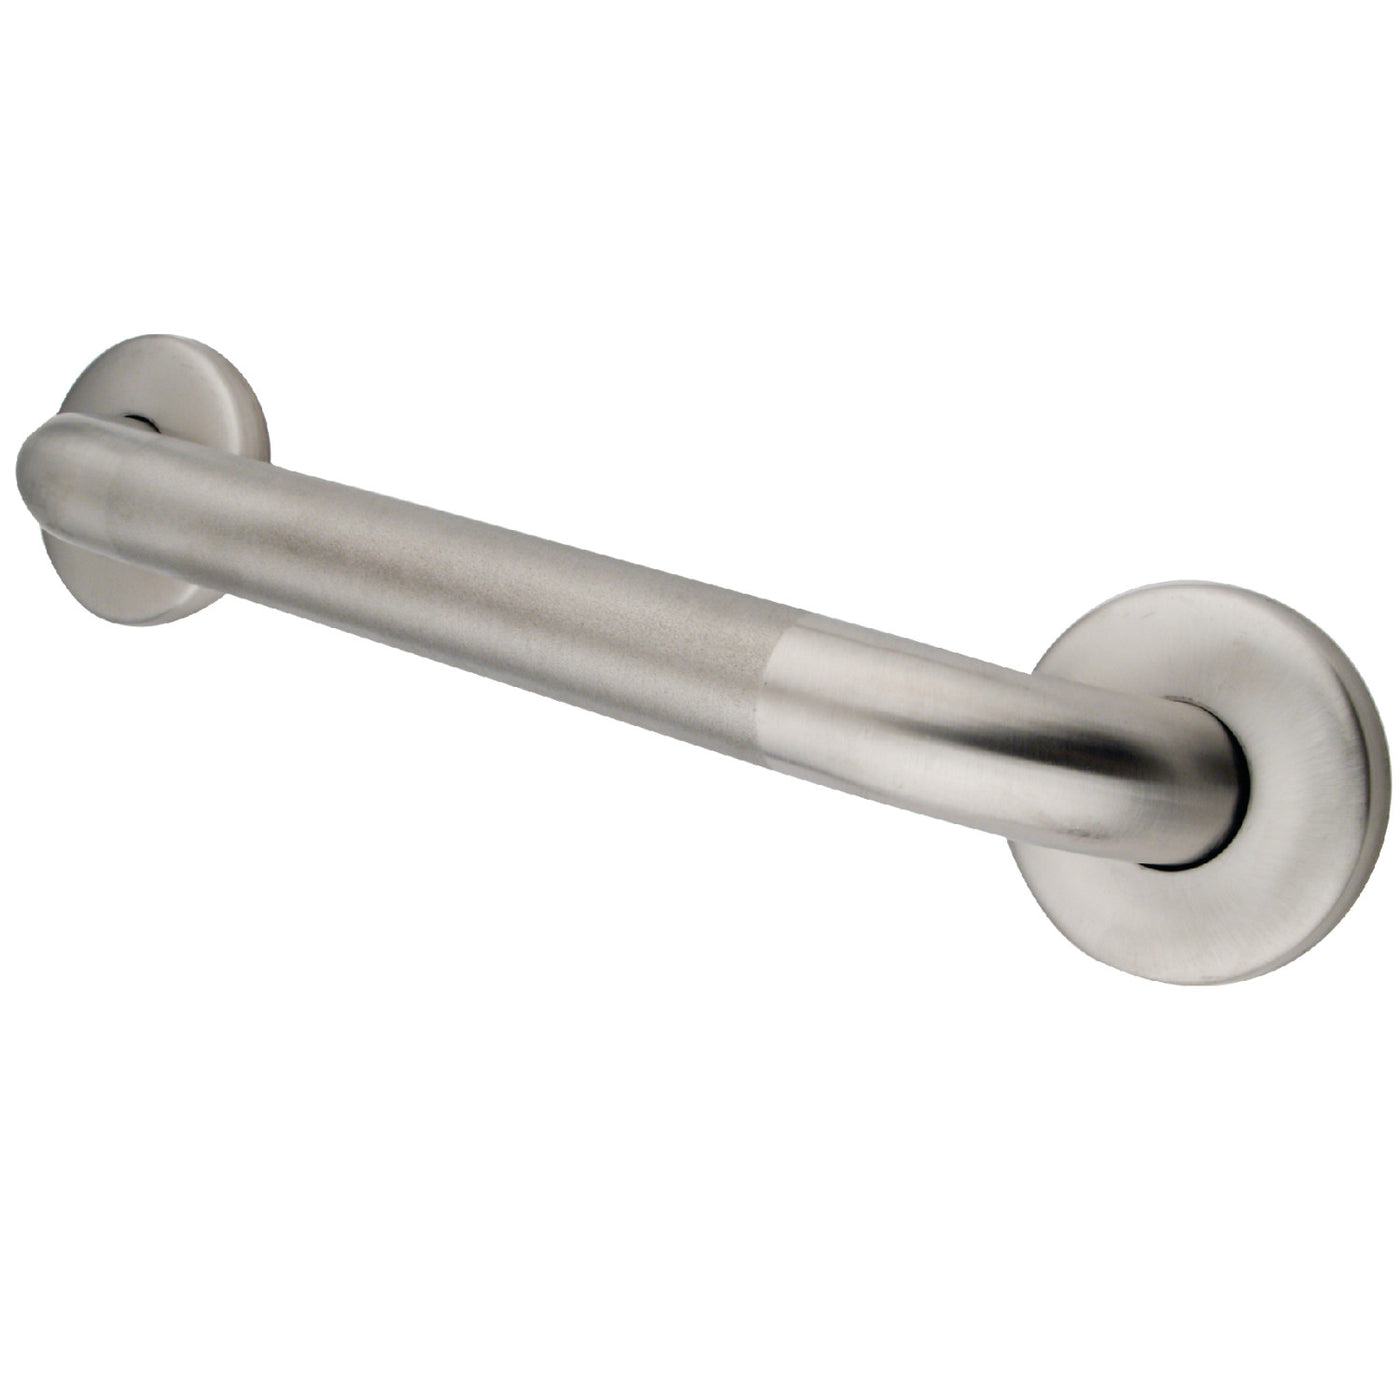 Elements of Design EGB1448CT 48-Inch Stainless Steel Grab Bar, Brushed